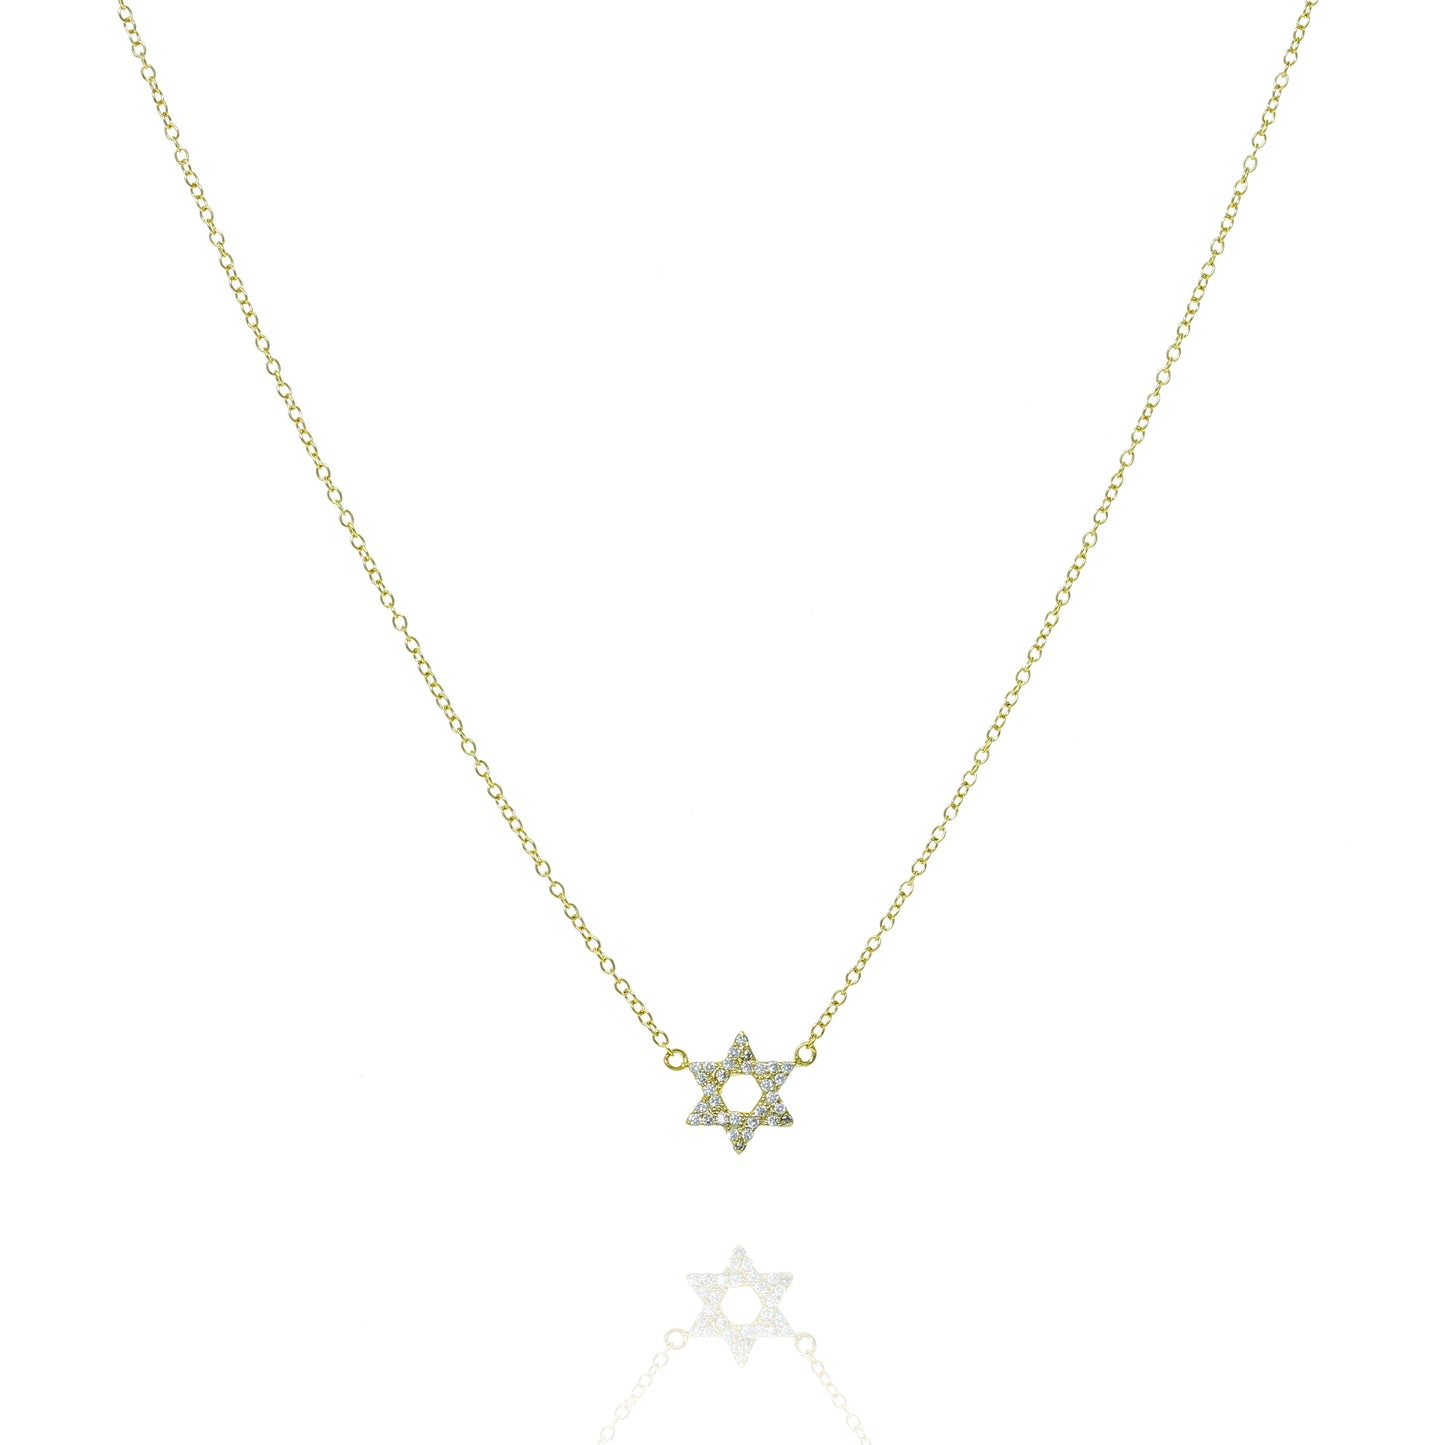 NF-66/G - Chain with Pave Star of David Pendant